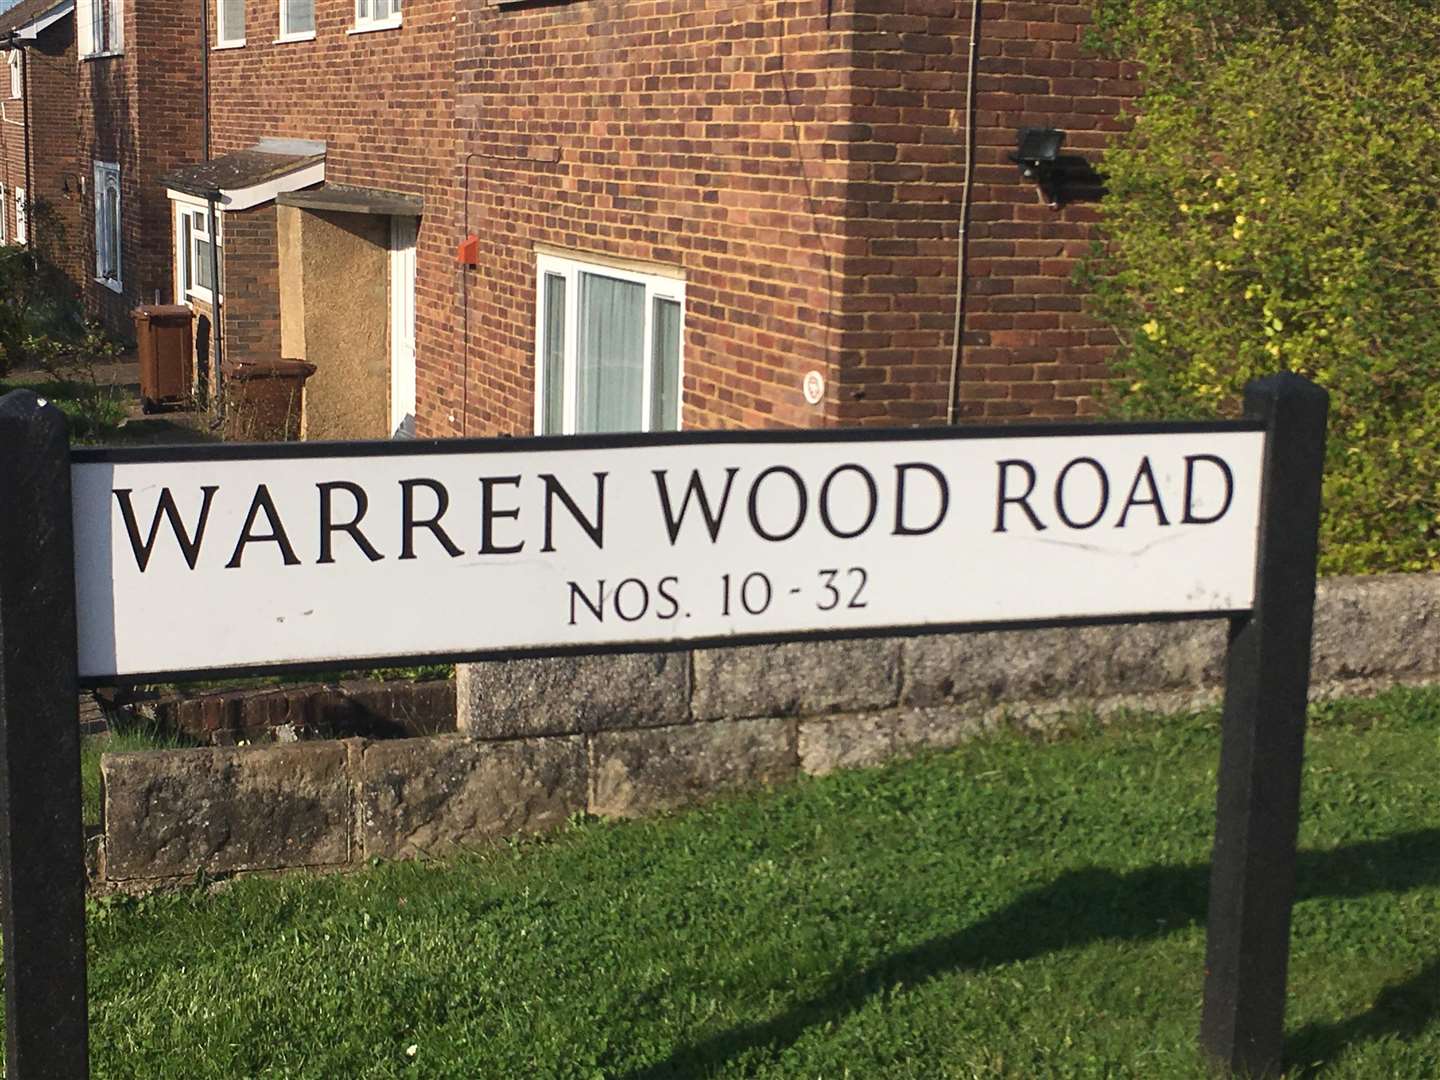 Warren Wood Road, where police have been carrying out an ongoing investigation